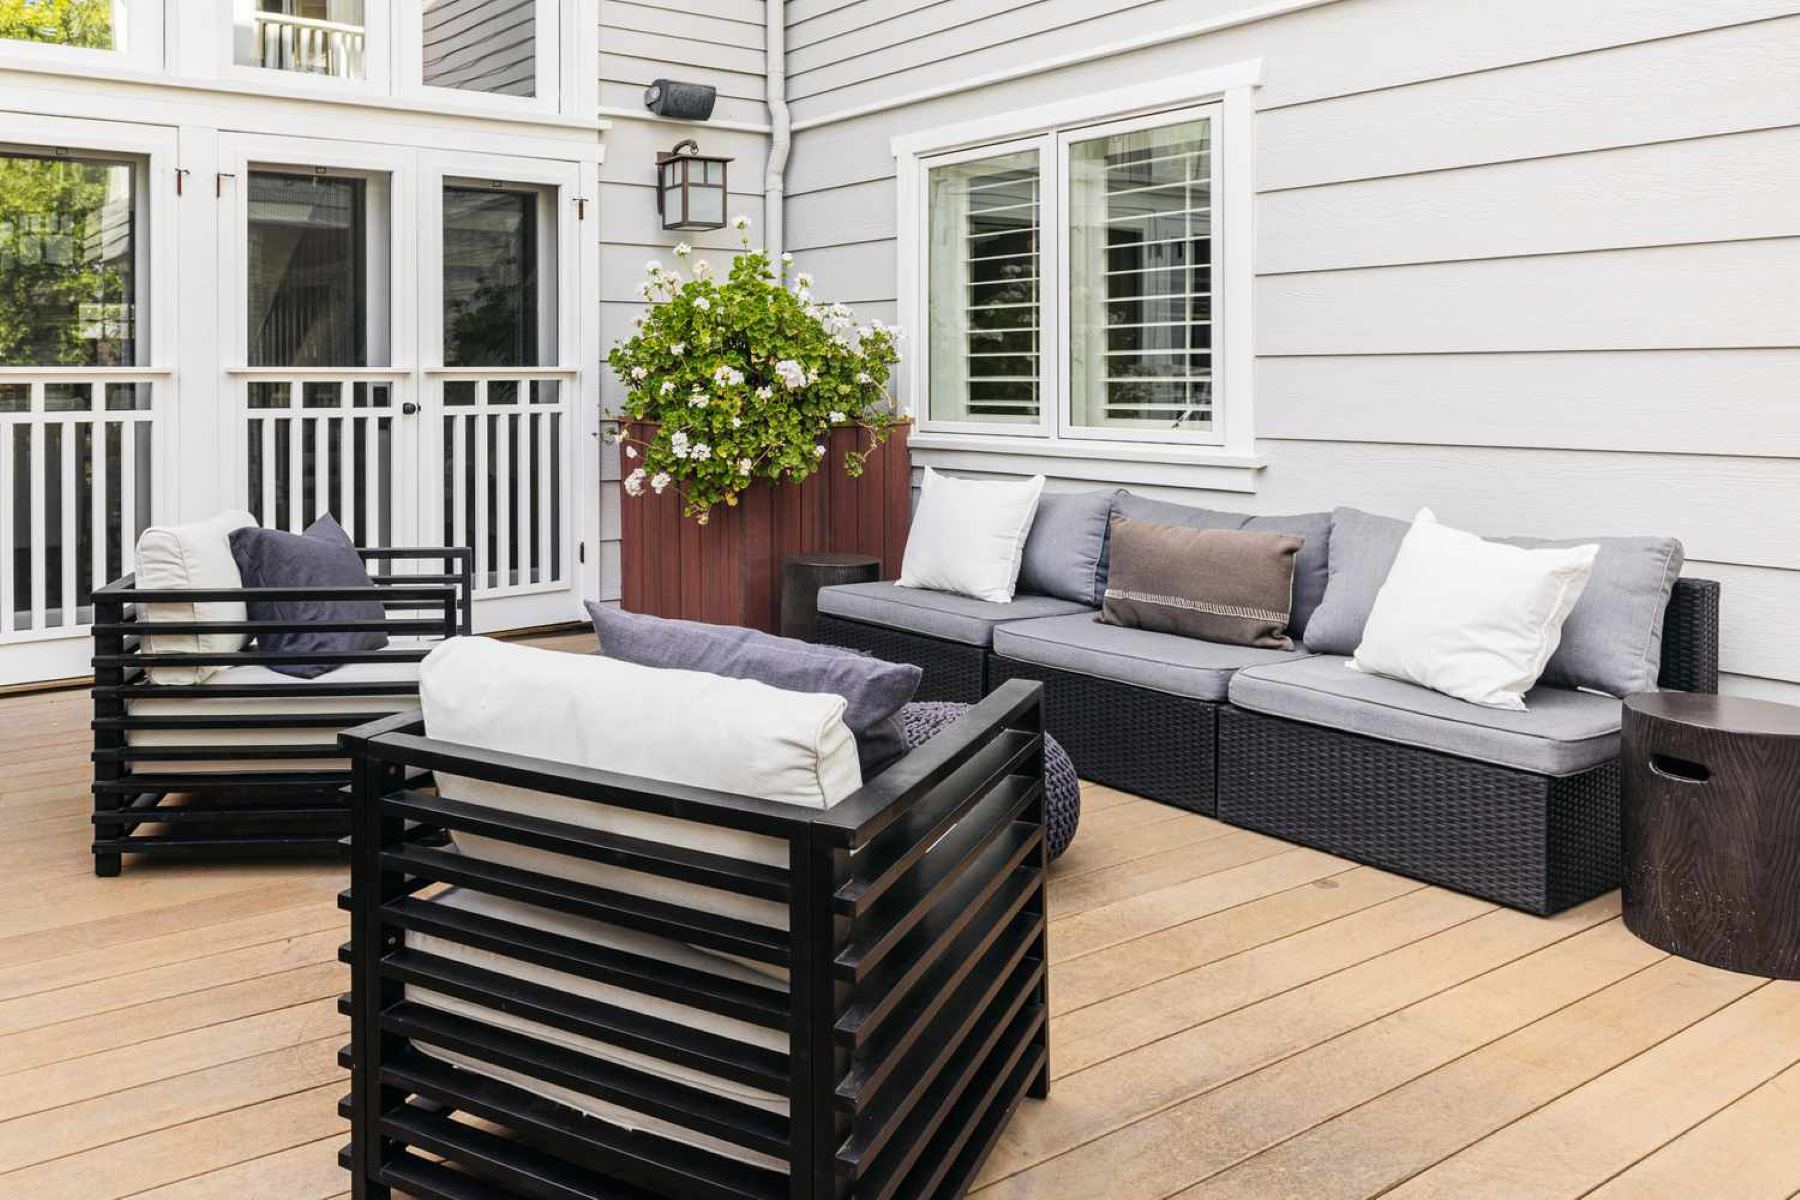 Who Specializes In The Design And Construction Of An Outdoor Deck Behind The House